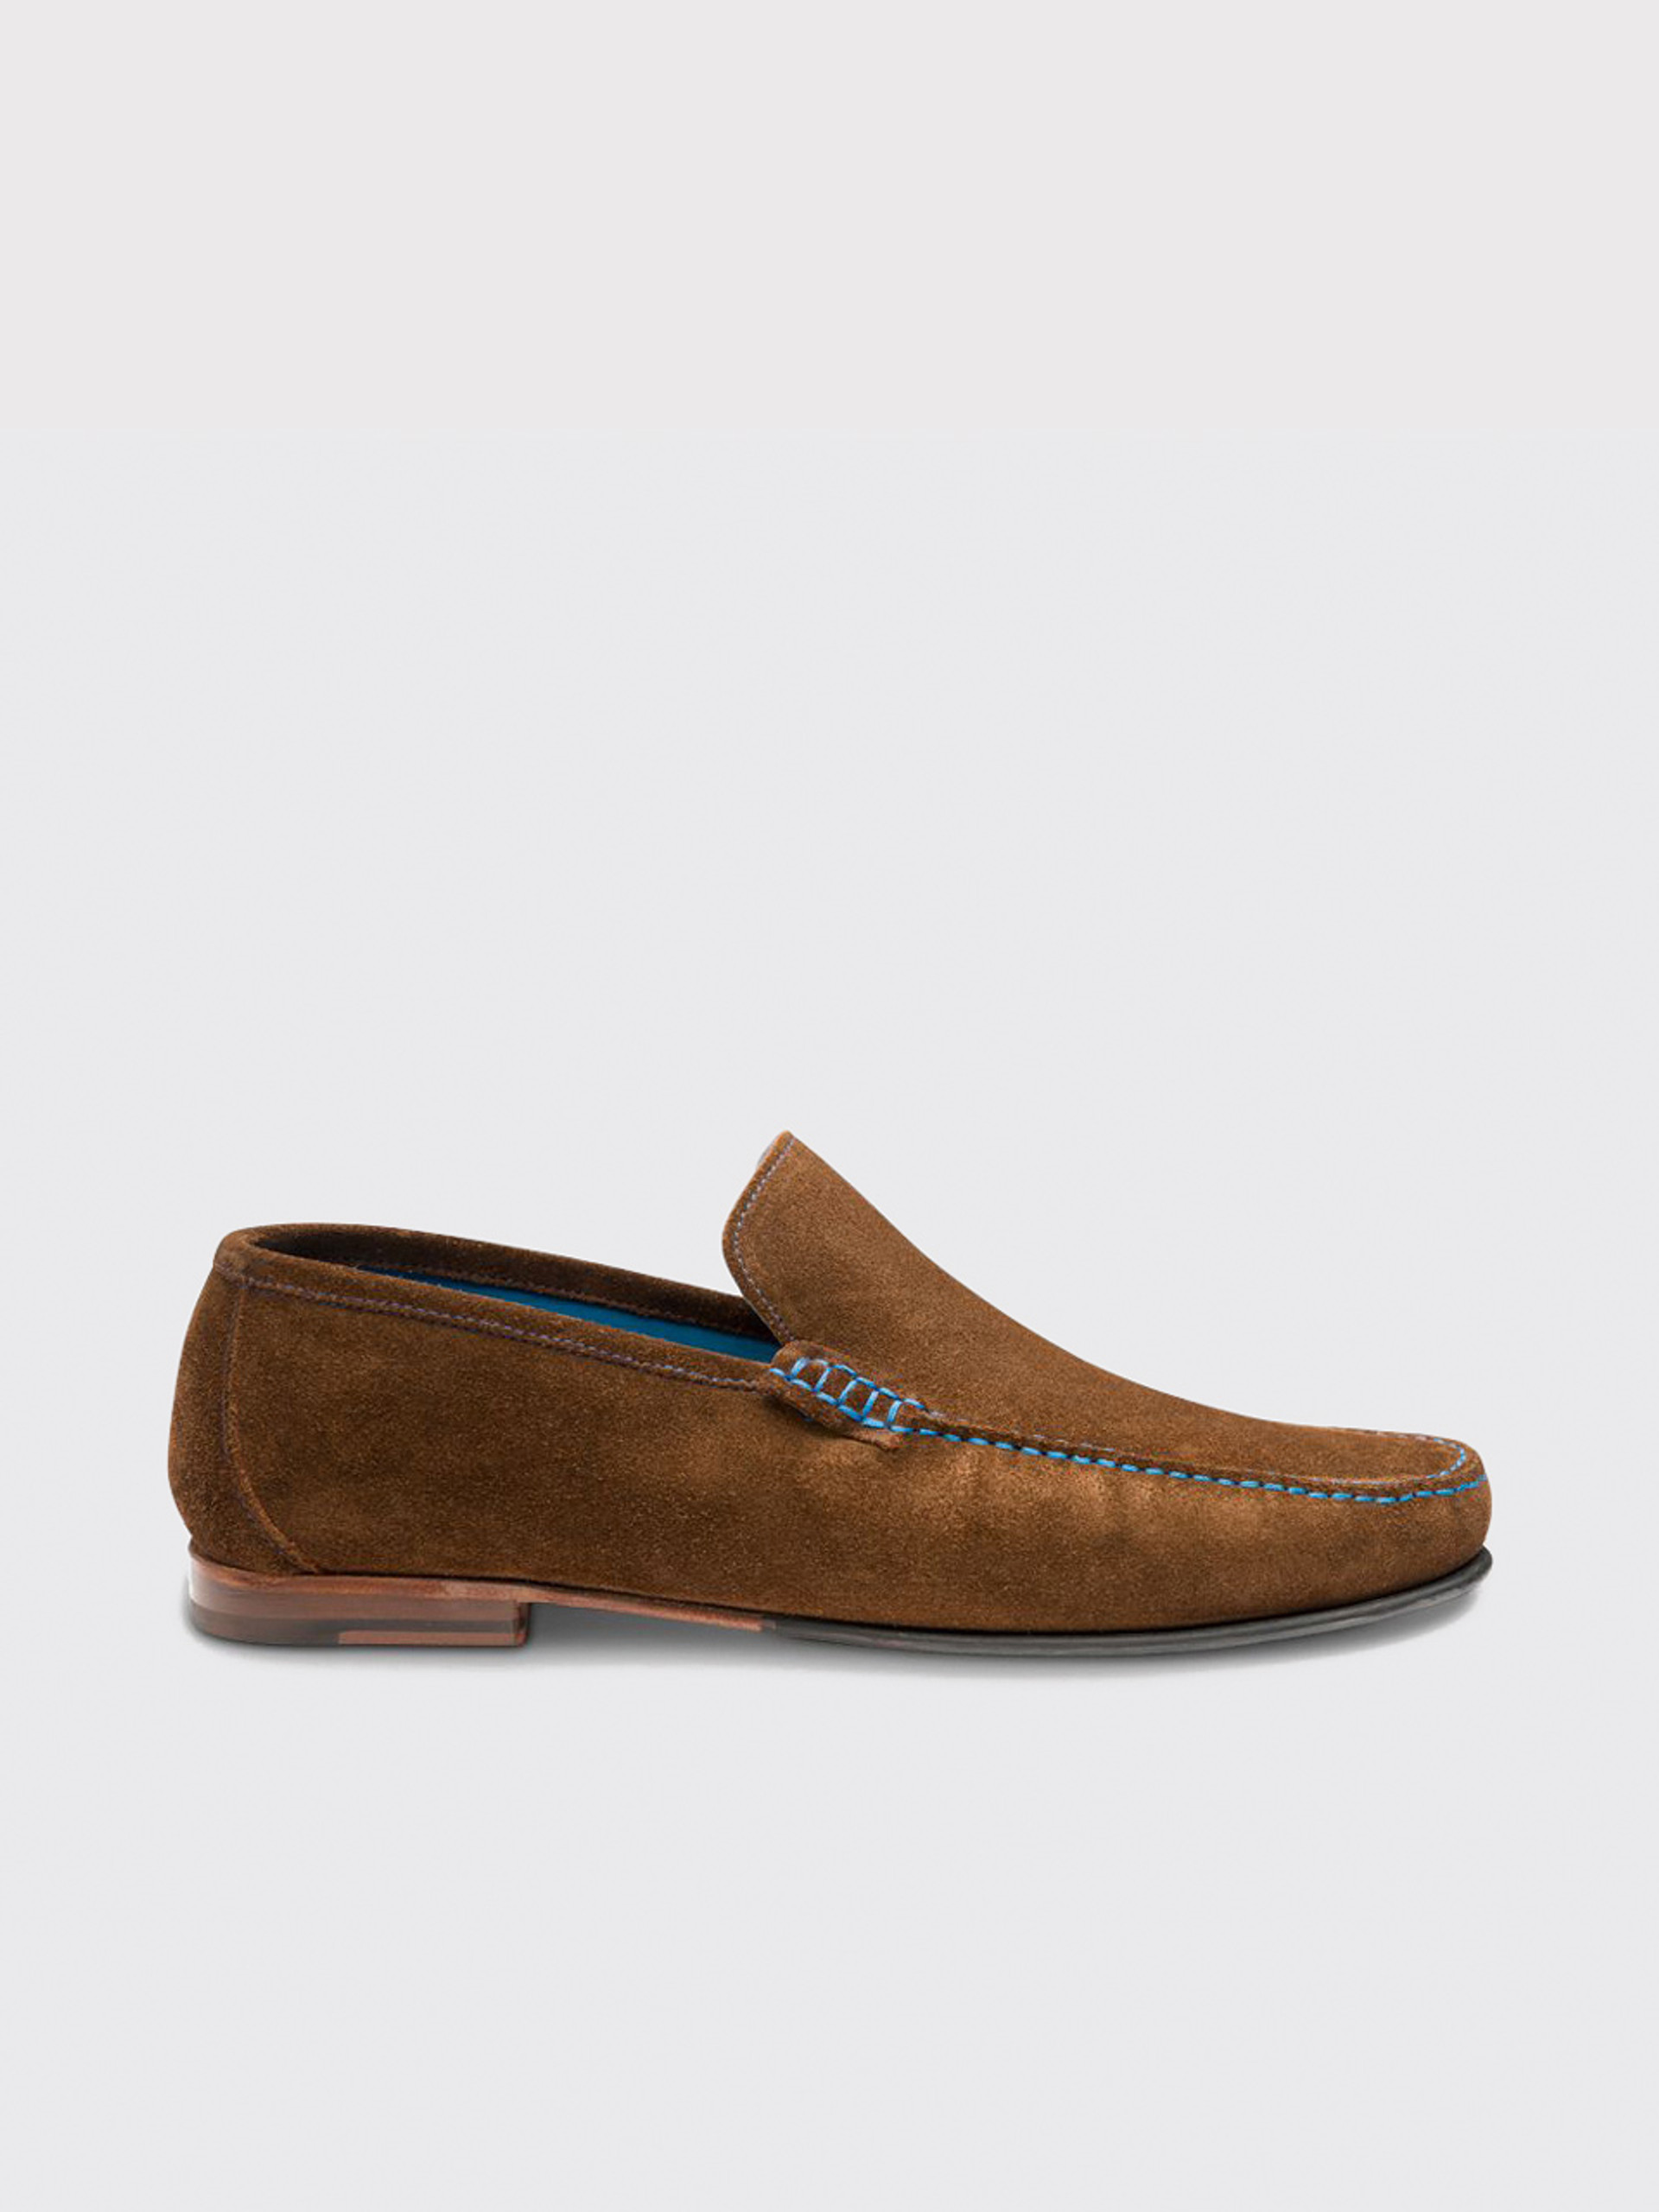 Brown Loake Nicholson Suede Loafer | Peter Christian